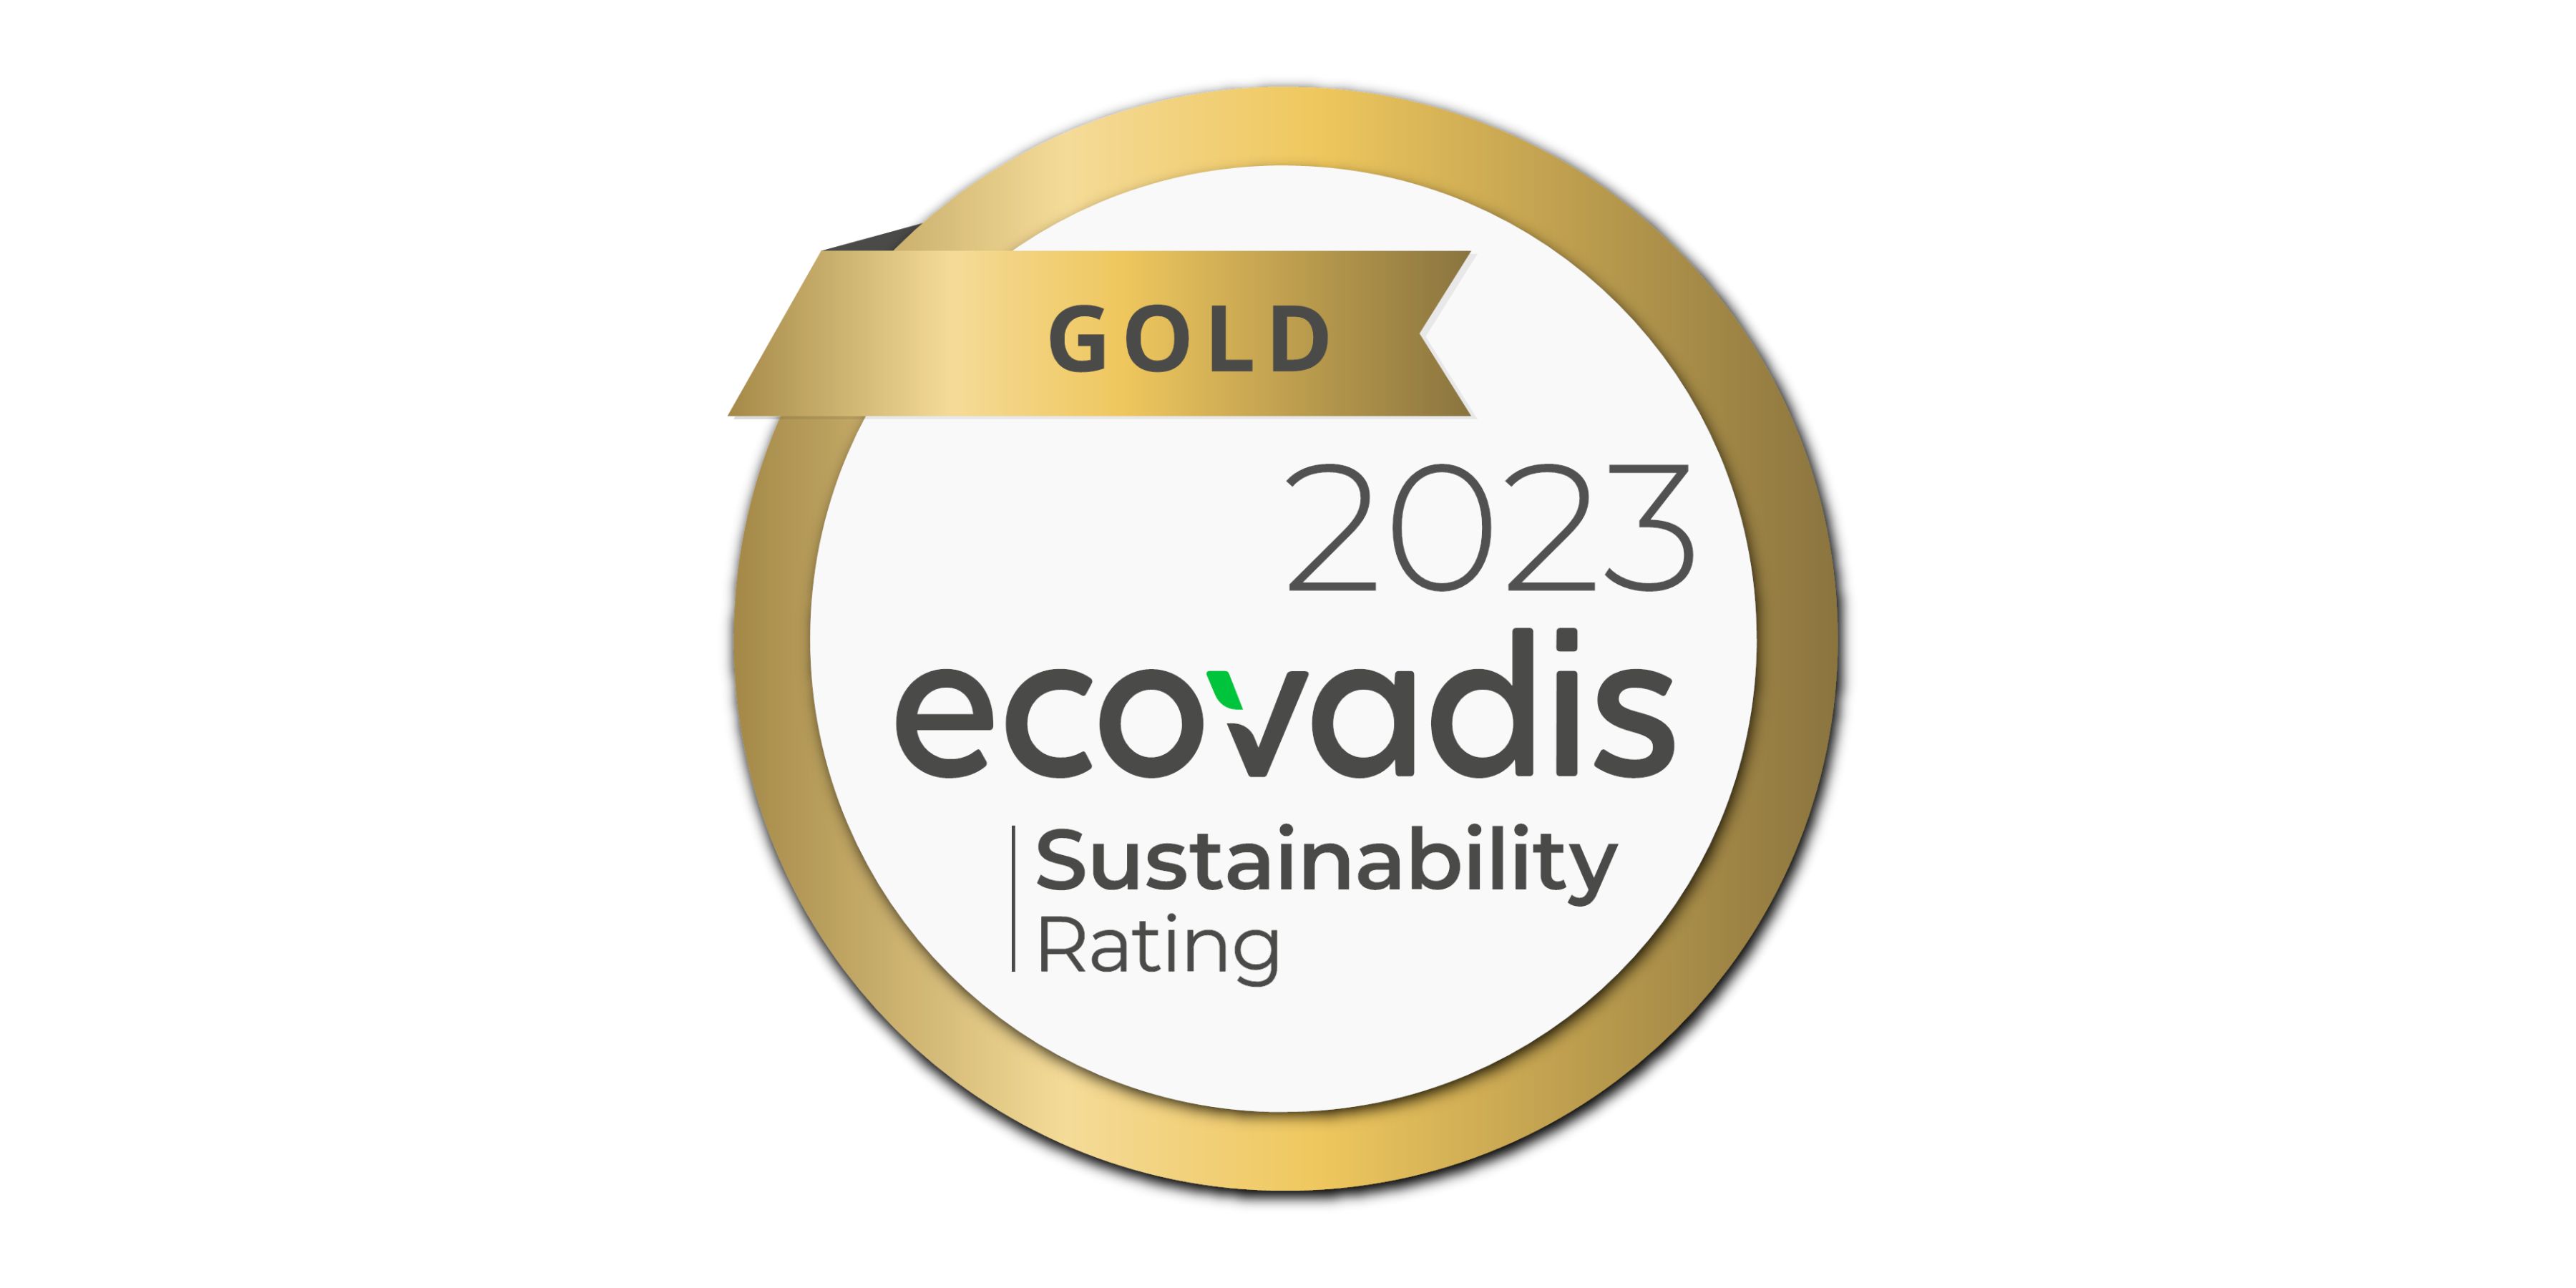 Arcadyan achieves Gold Medal in 2023 EcoVadis sustainability ratings.